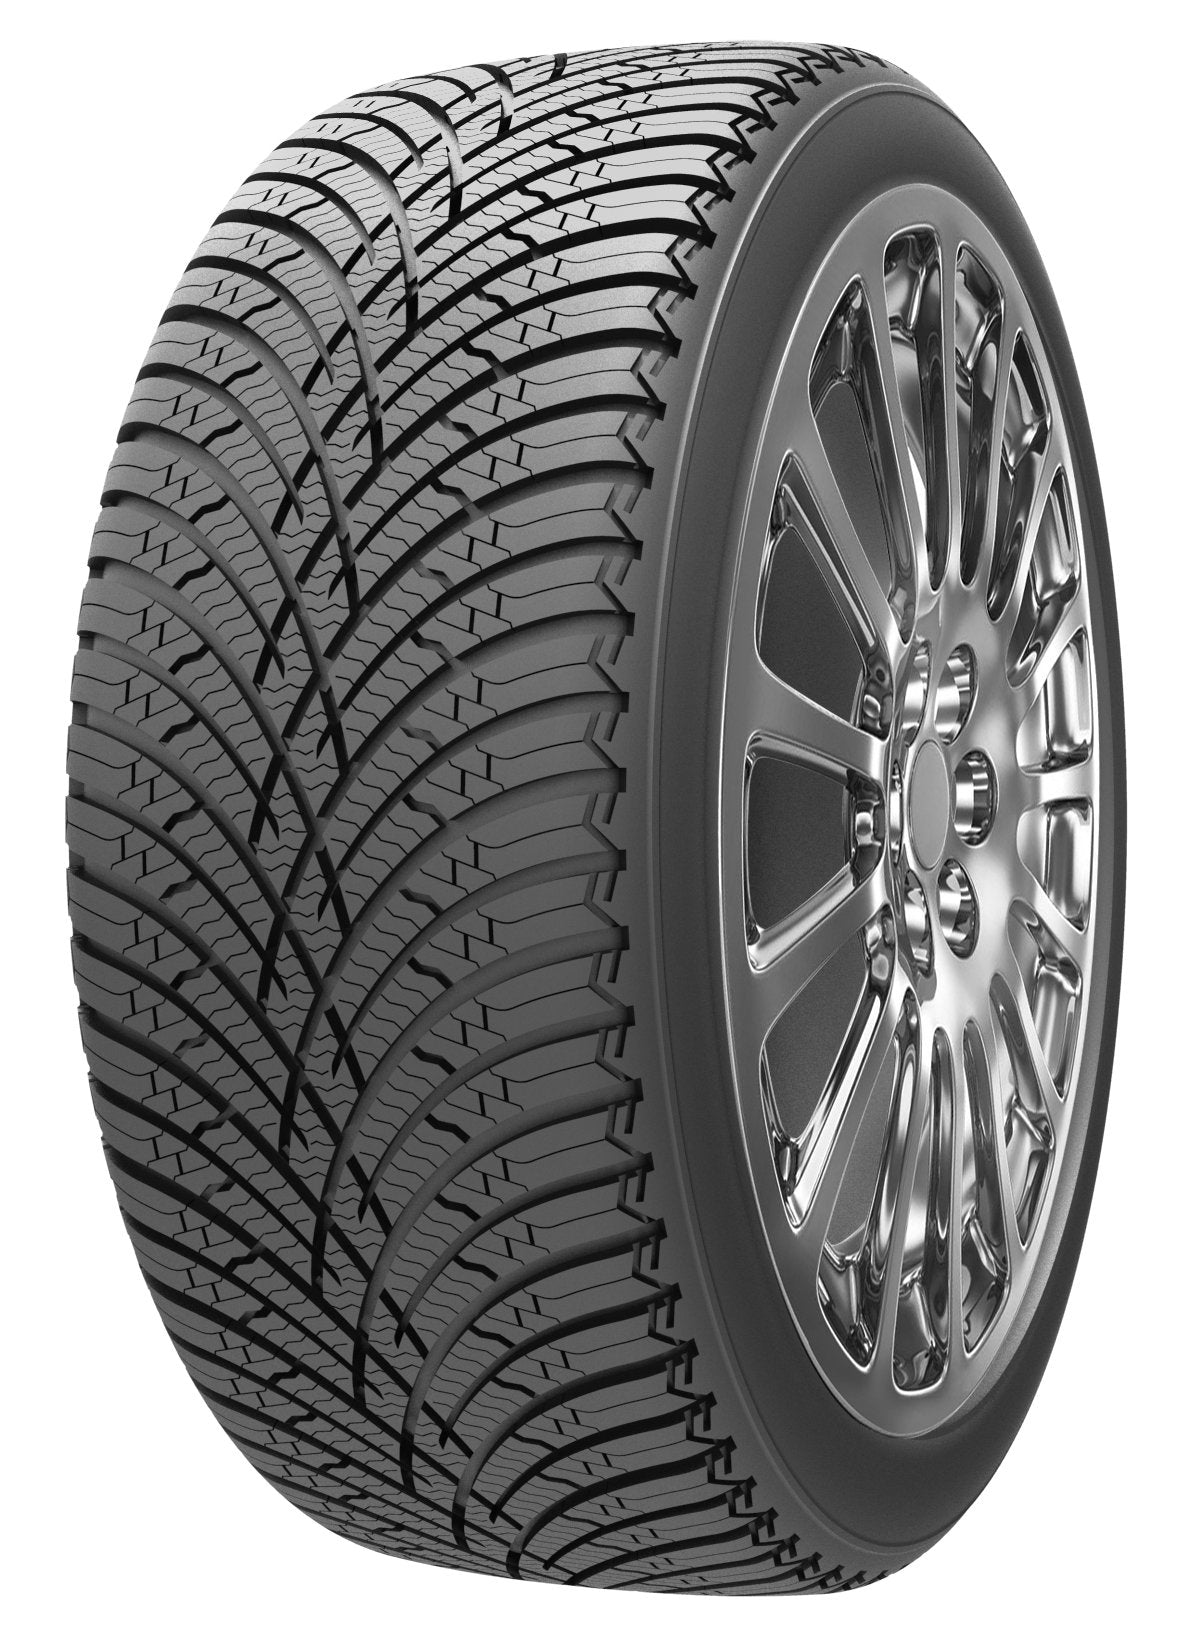 185/60R15 HEADWAY PMS01 ALL WEATHER - Toee Tire